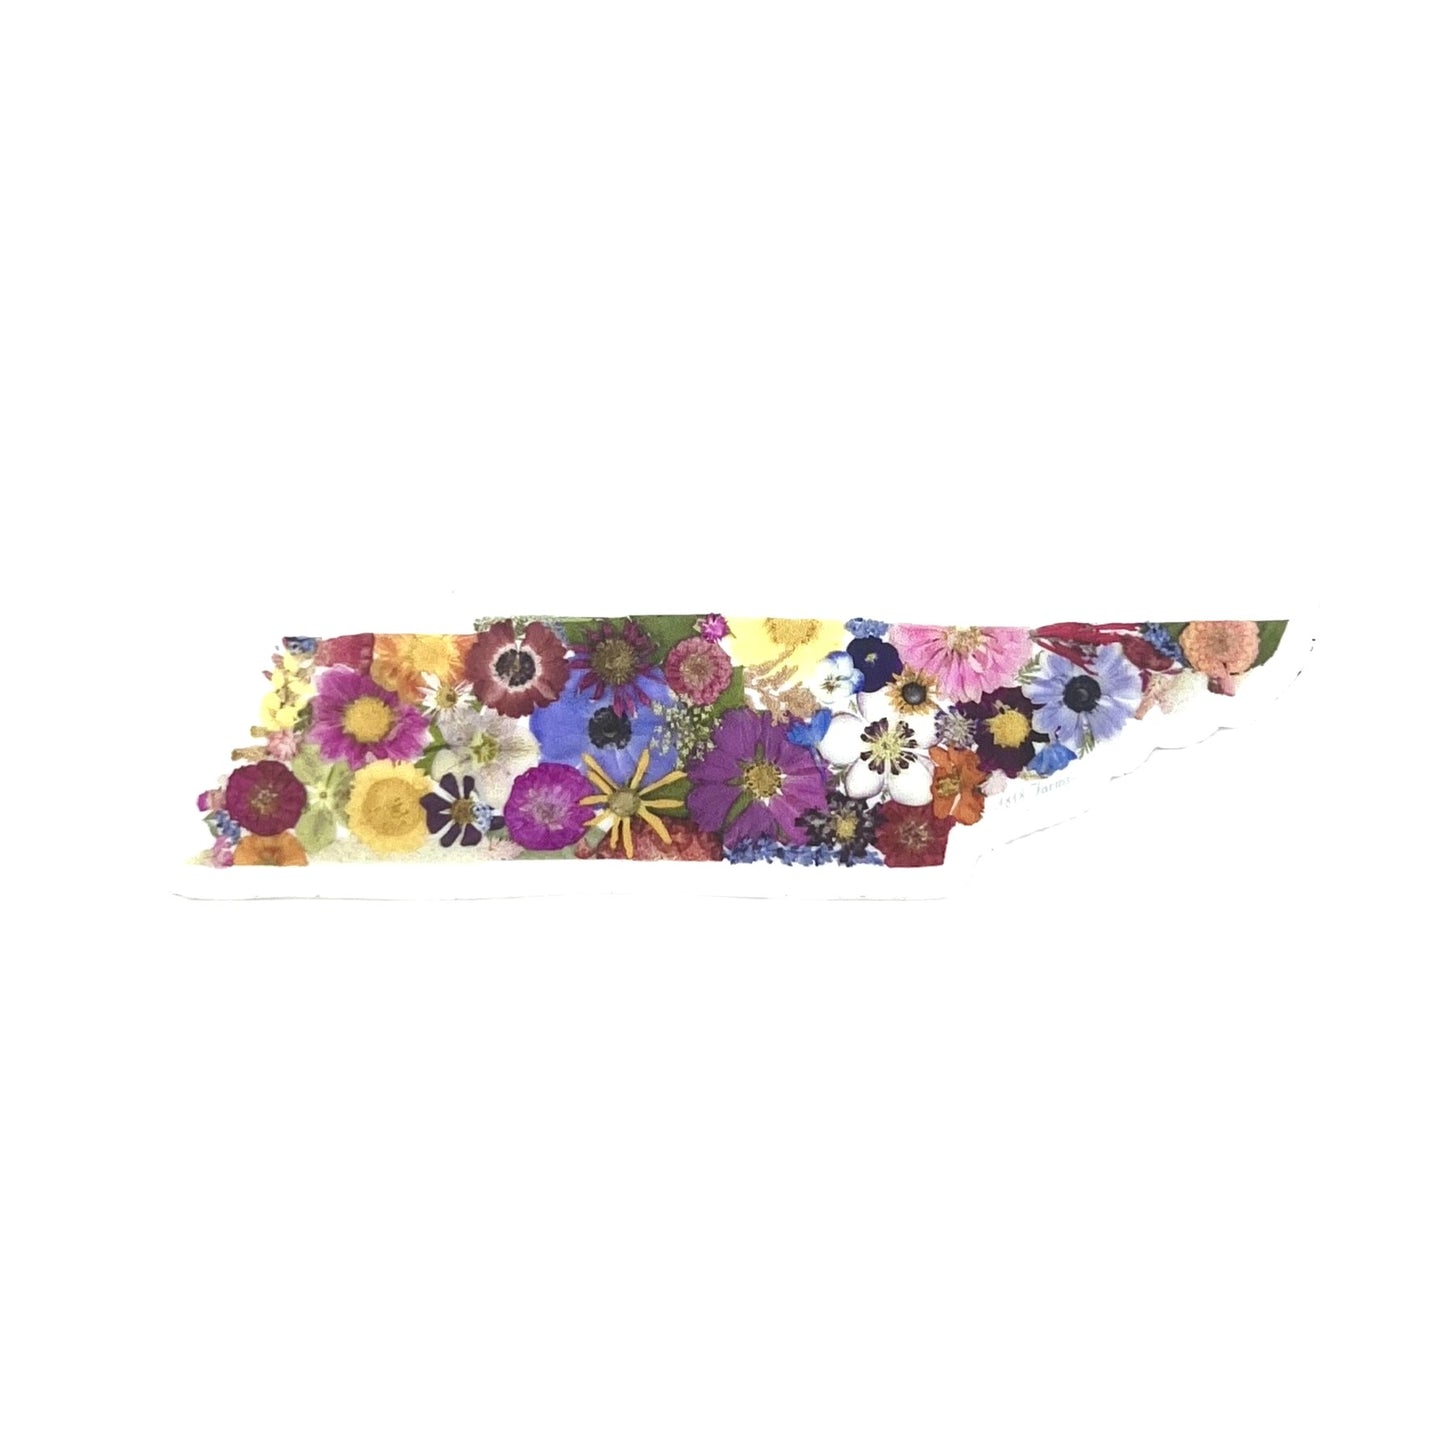 State Themed Vinyl Sticker  - "Where I Bloom" Collection Vinyl Sticker 1818 Farms Tennesse  